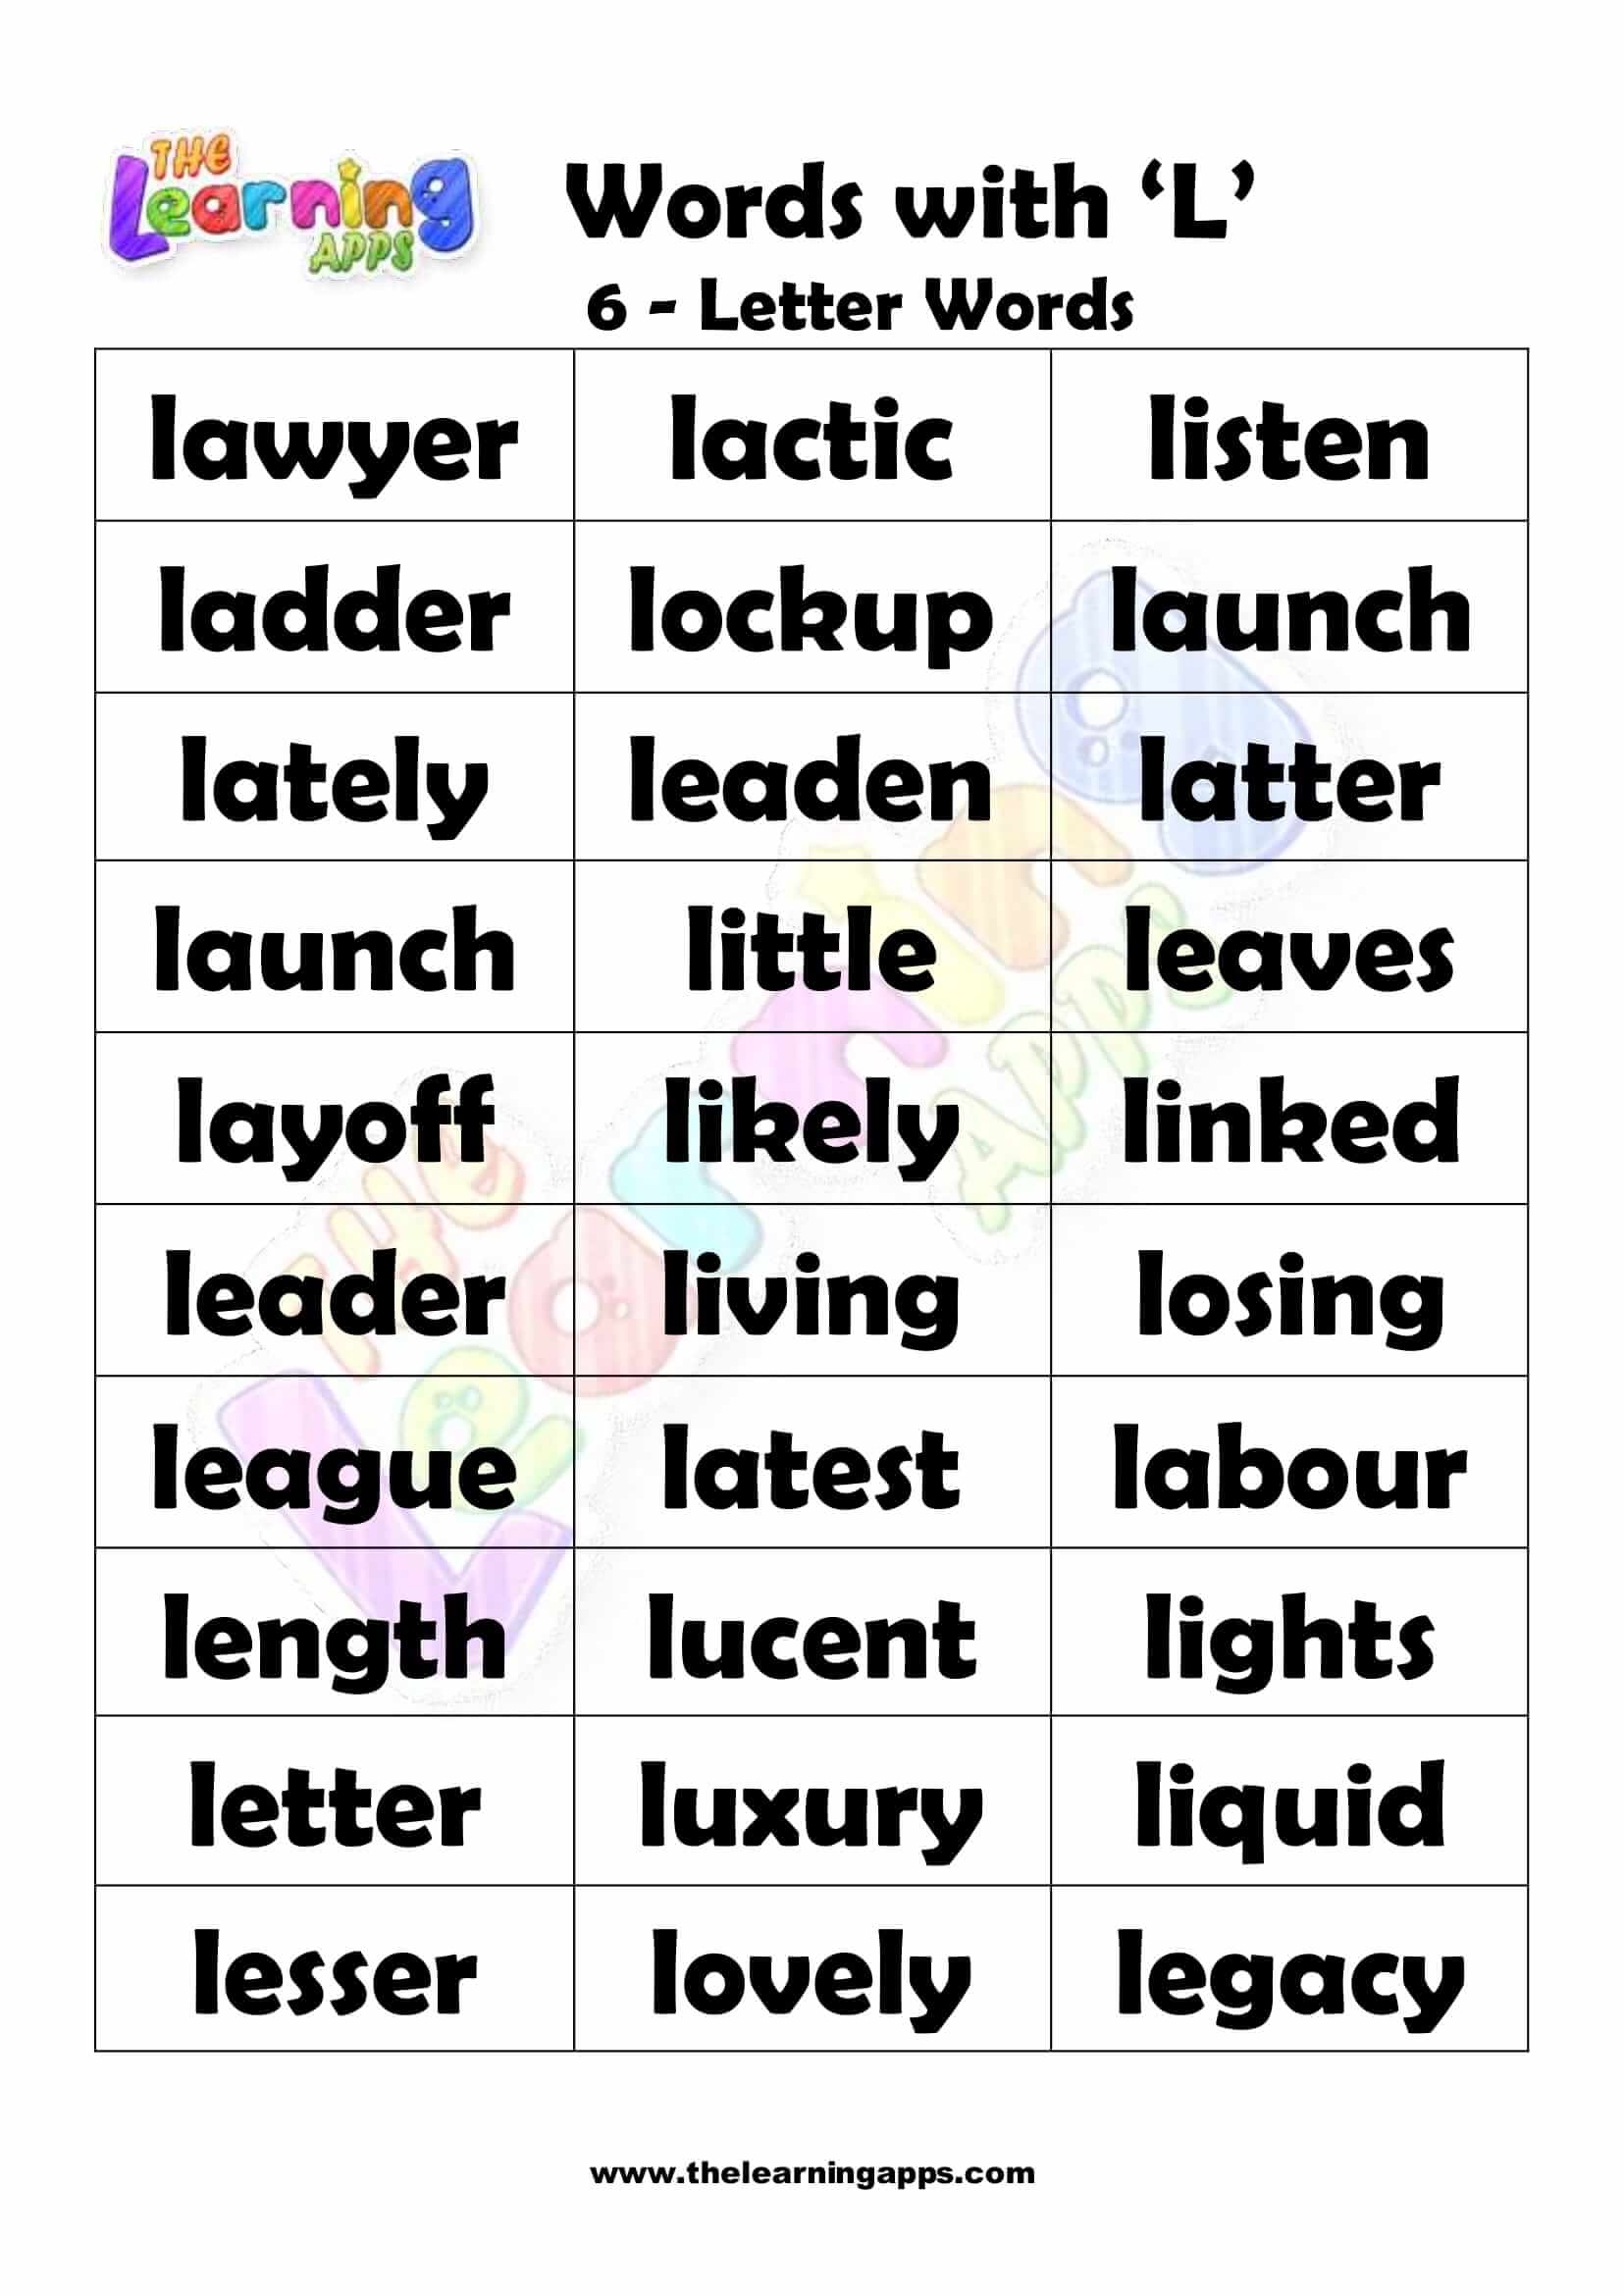 6 LETTER WORD STARTING WITH L-2